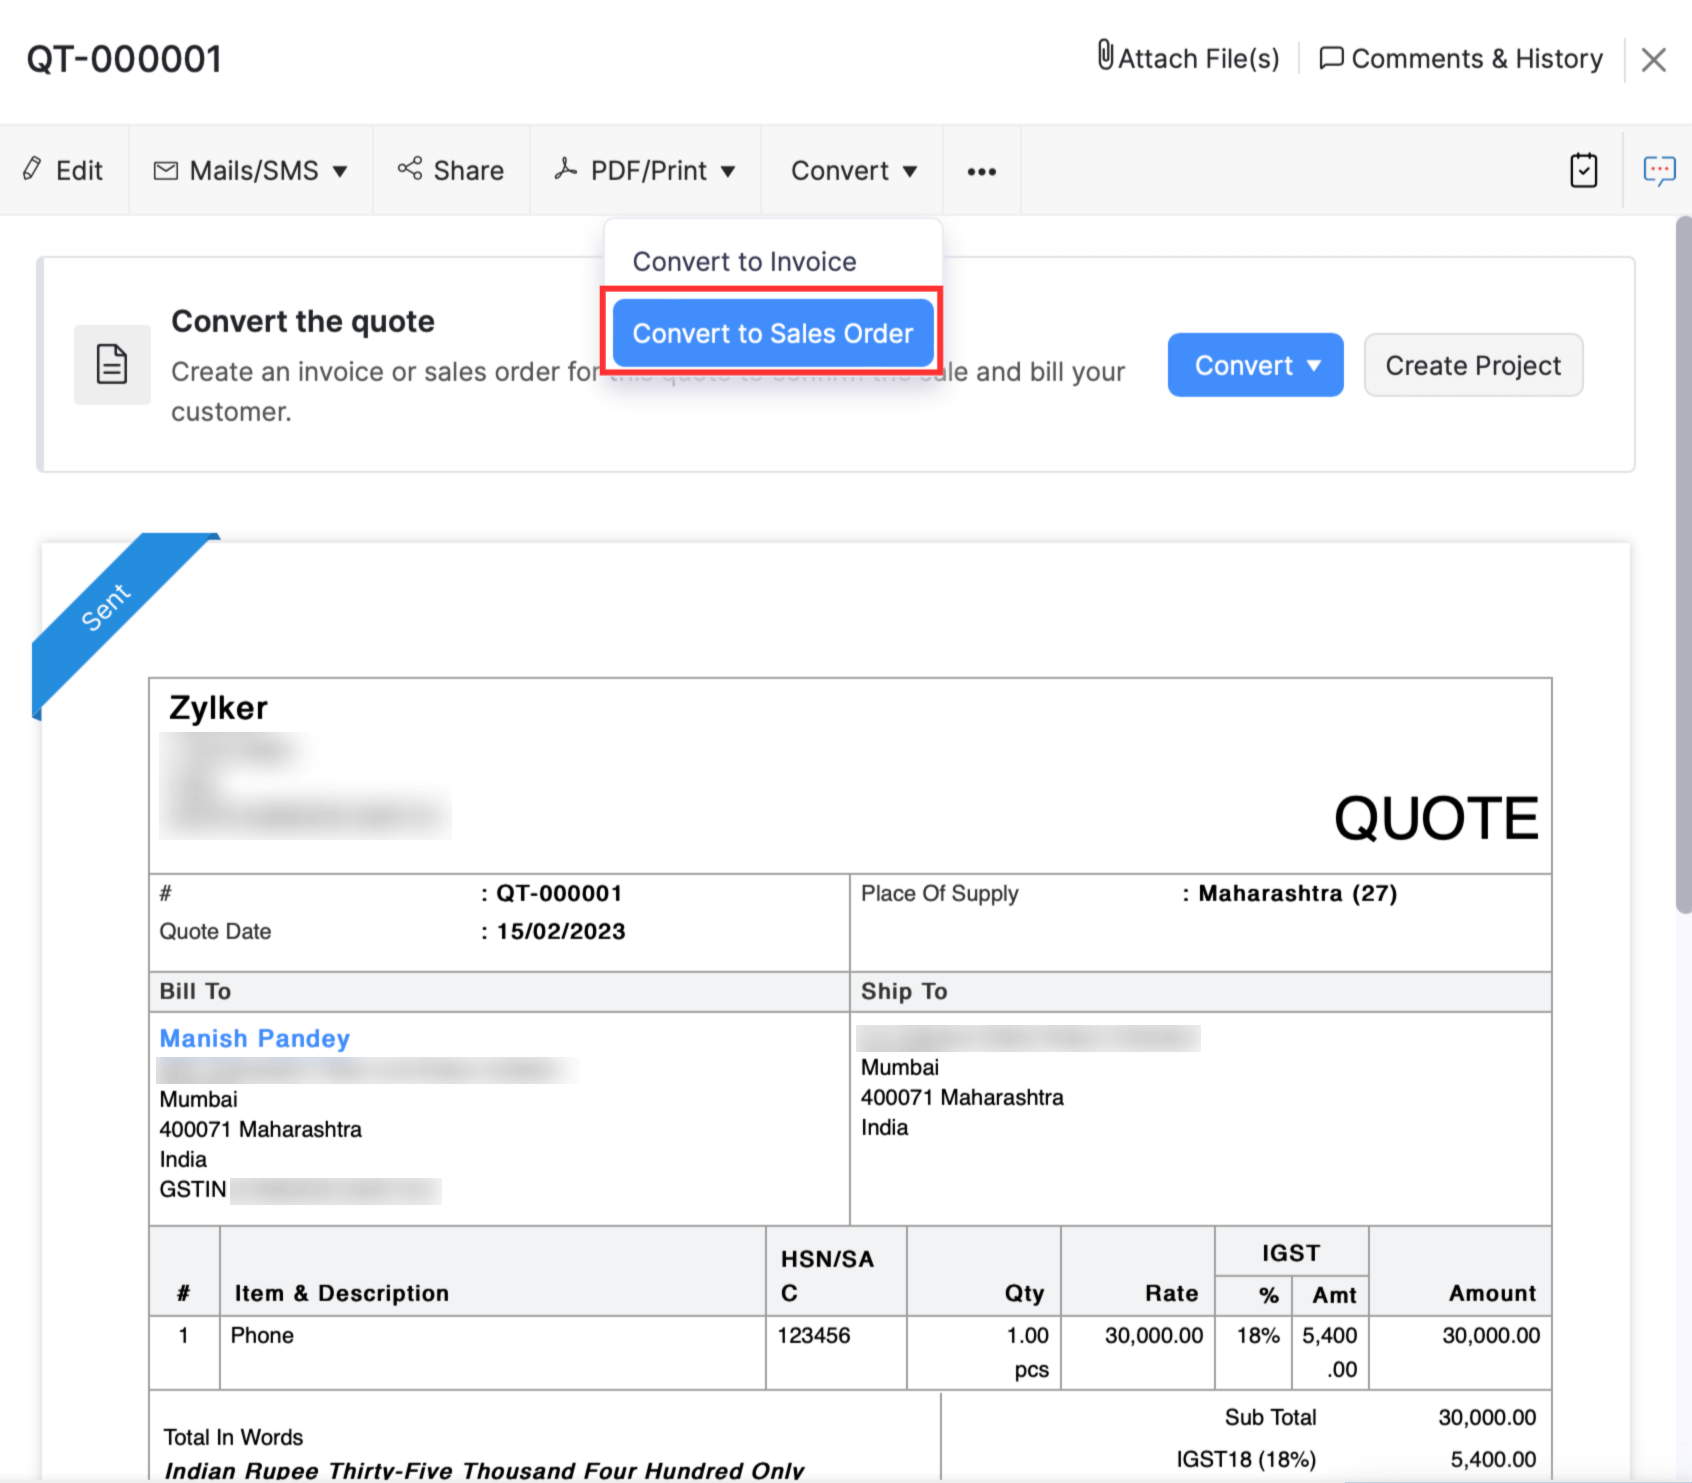 Convert quote to sales order